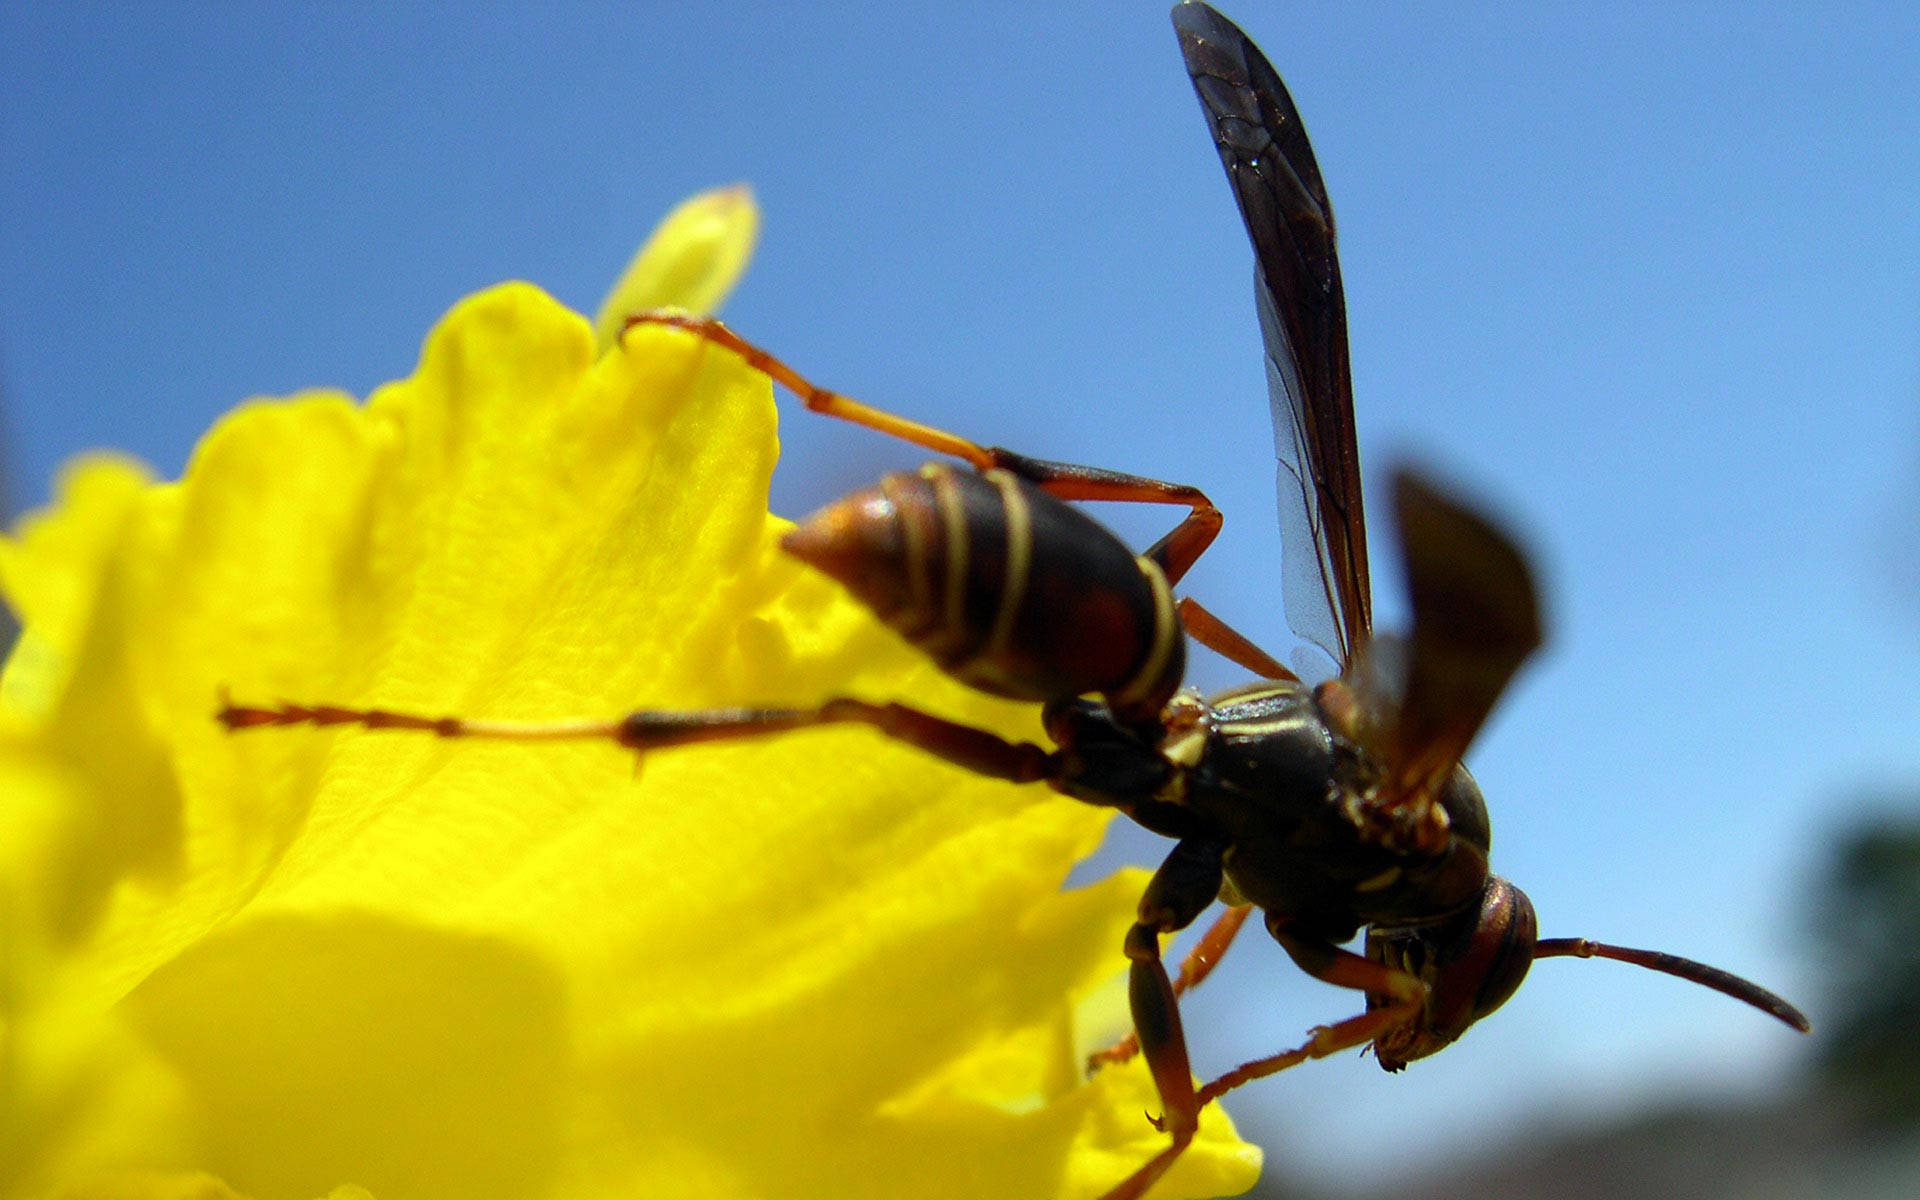 Insect Wasp On Yellow Flower Background